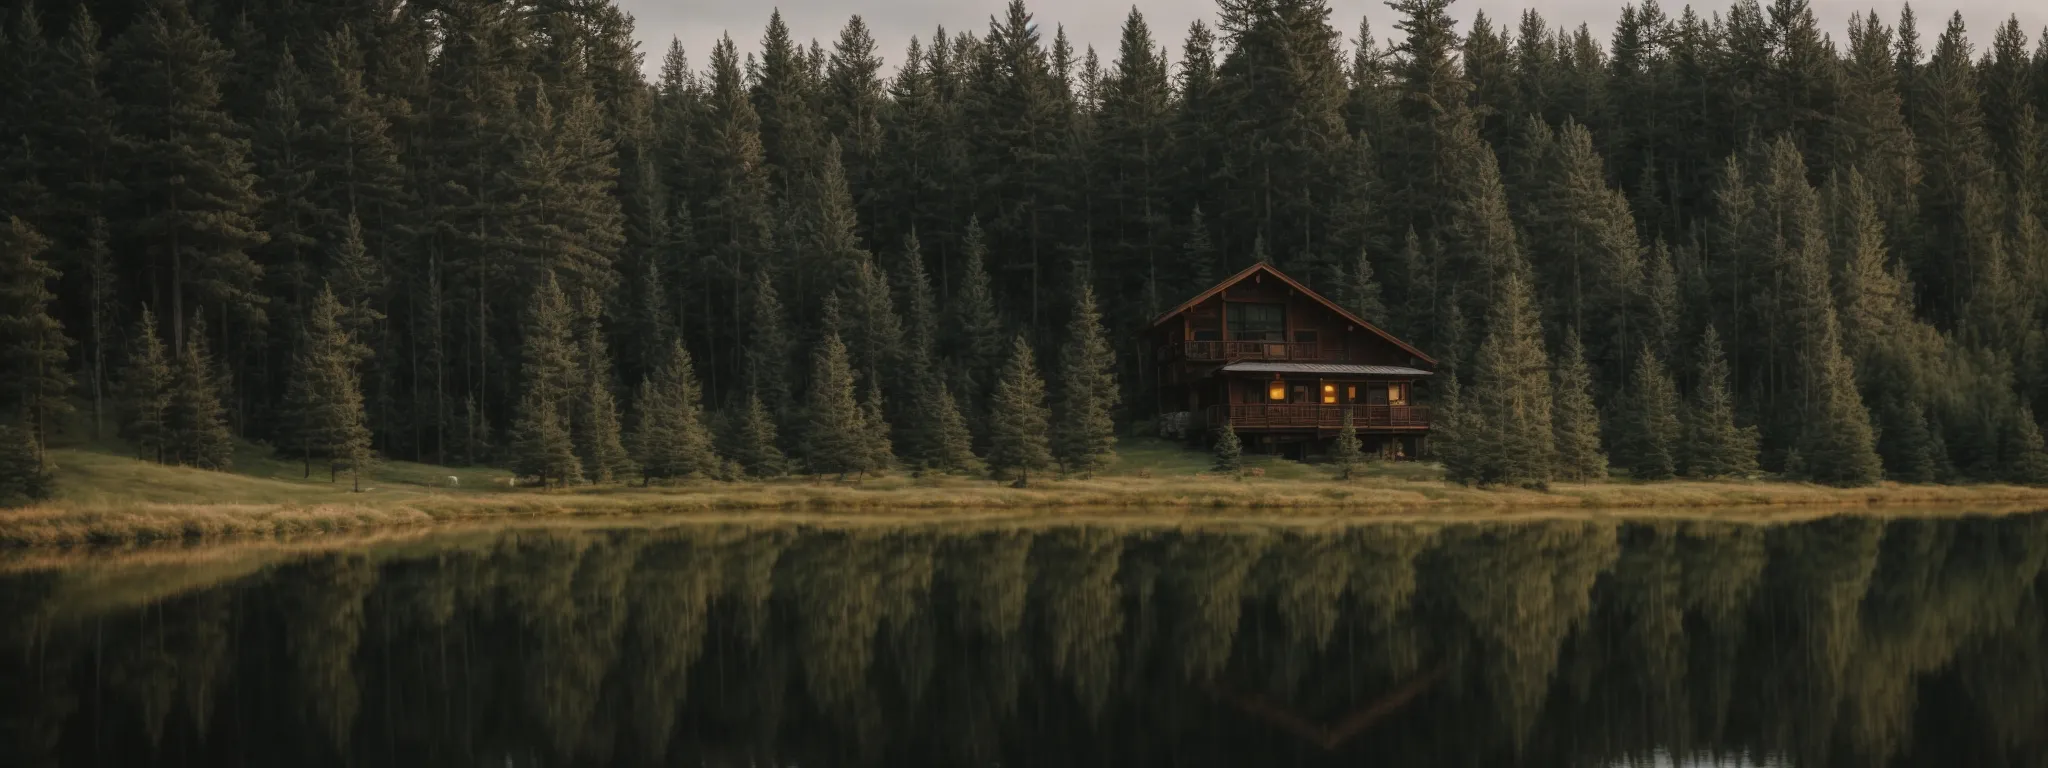 a serene lakefront cabin surrounded by whispering pines, reflecting a tranquil getaway spot.